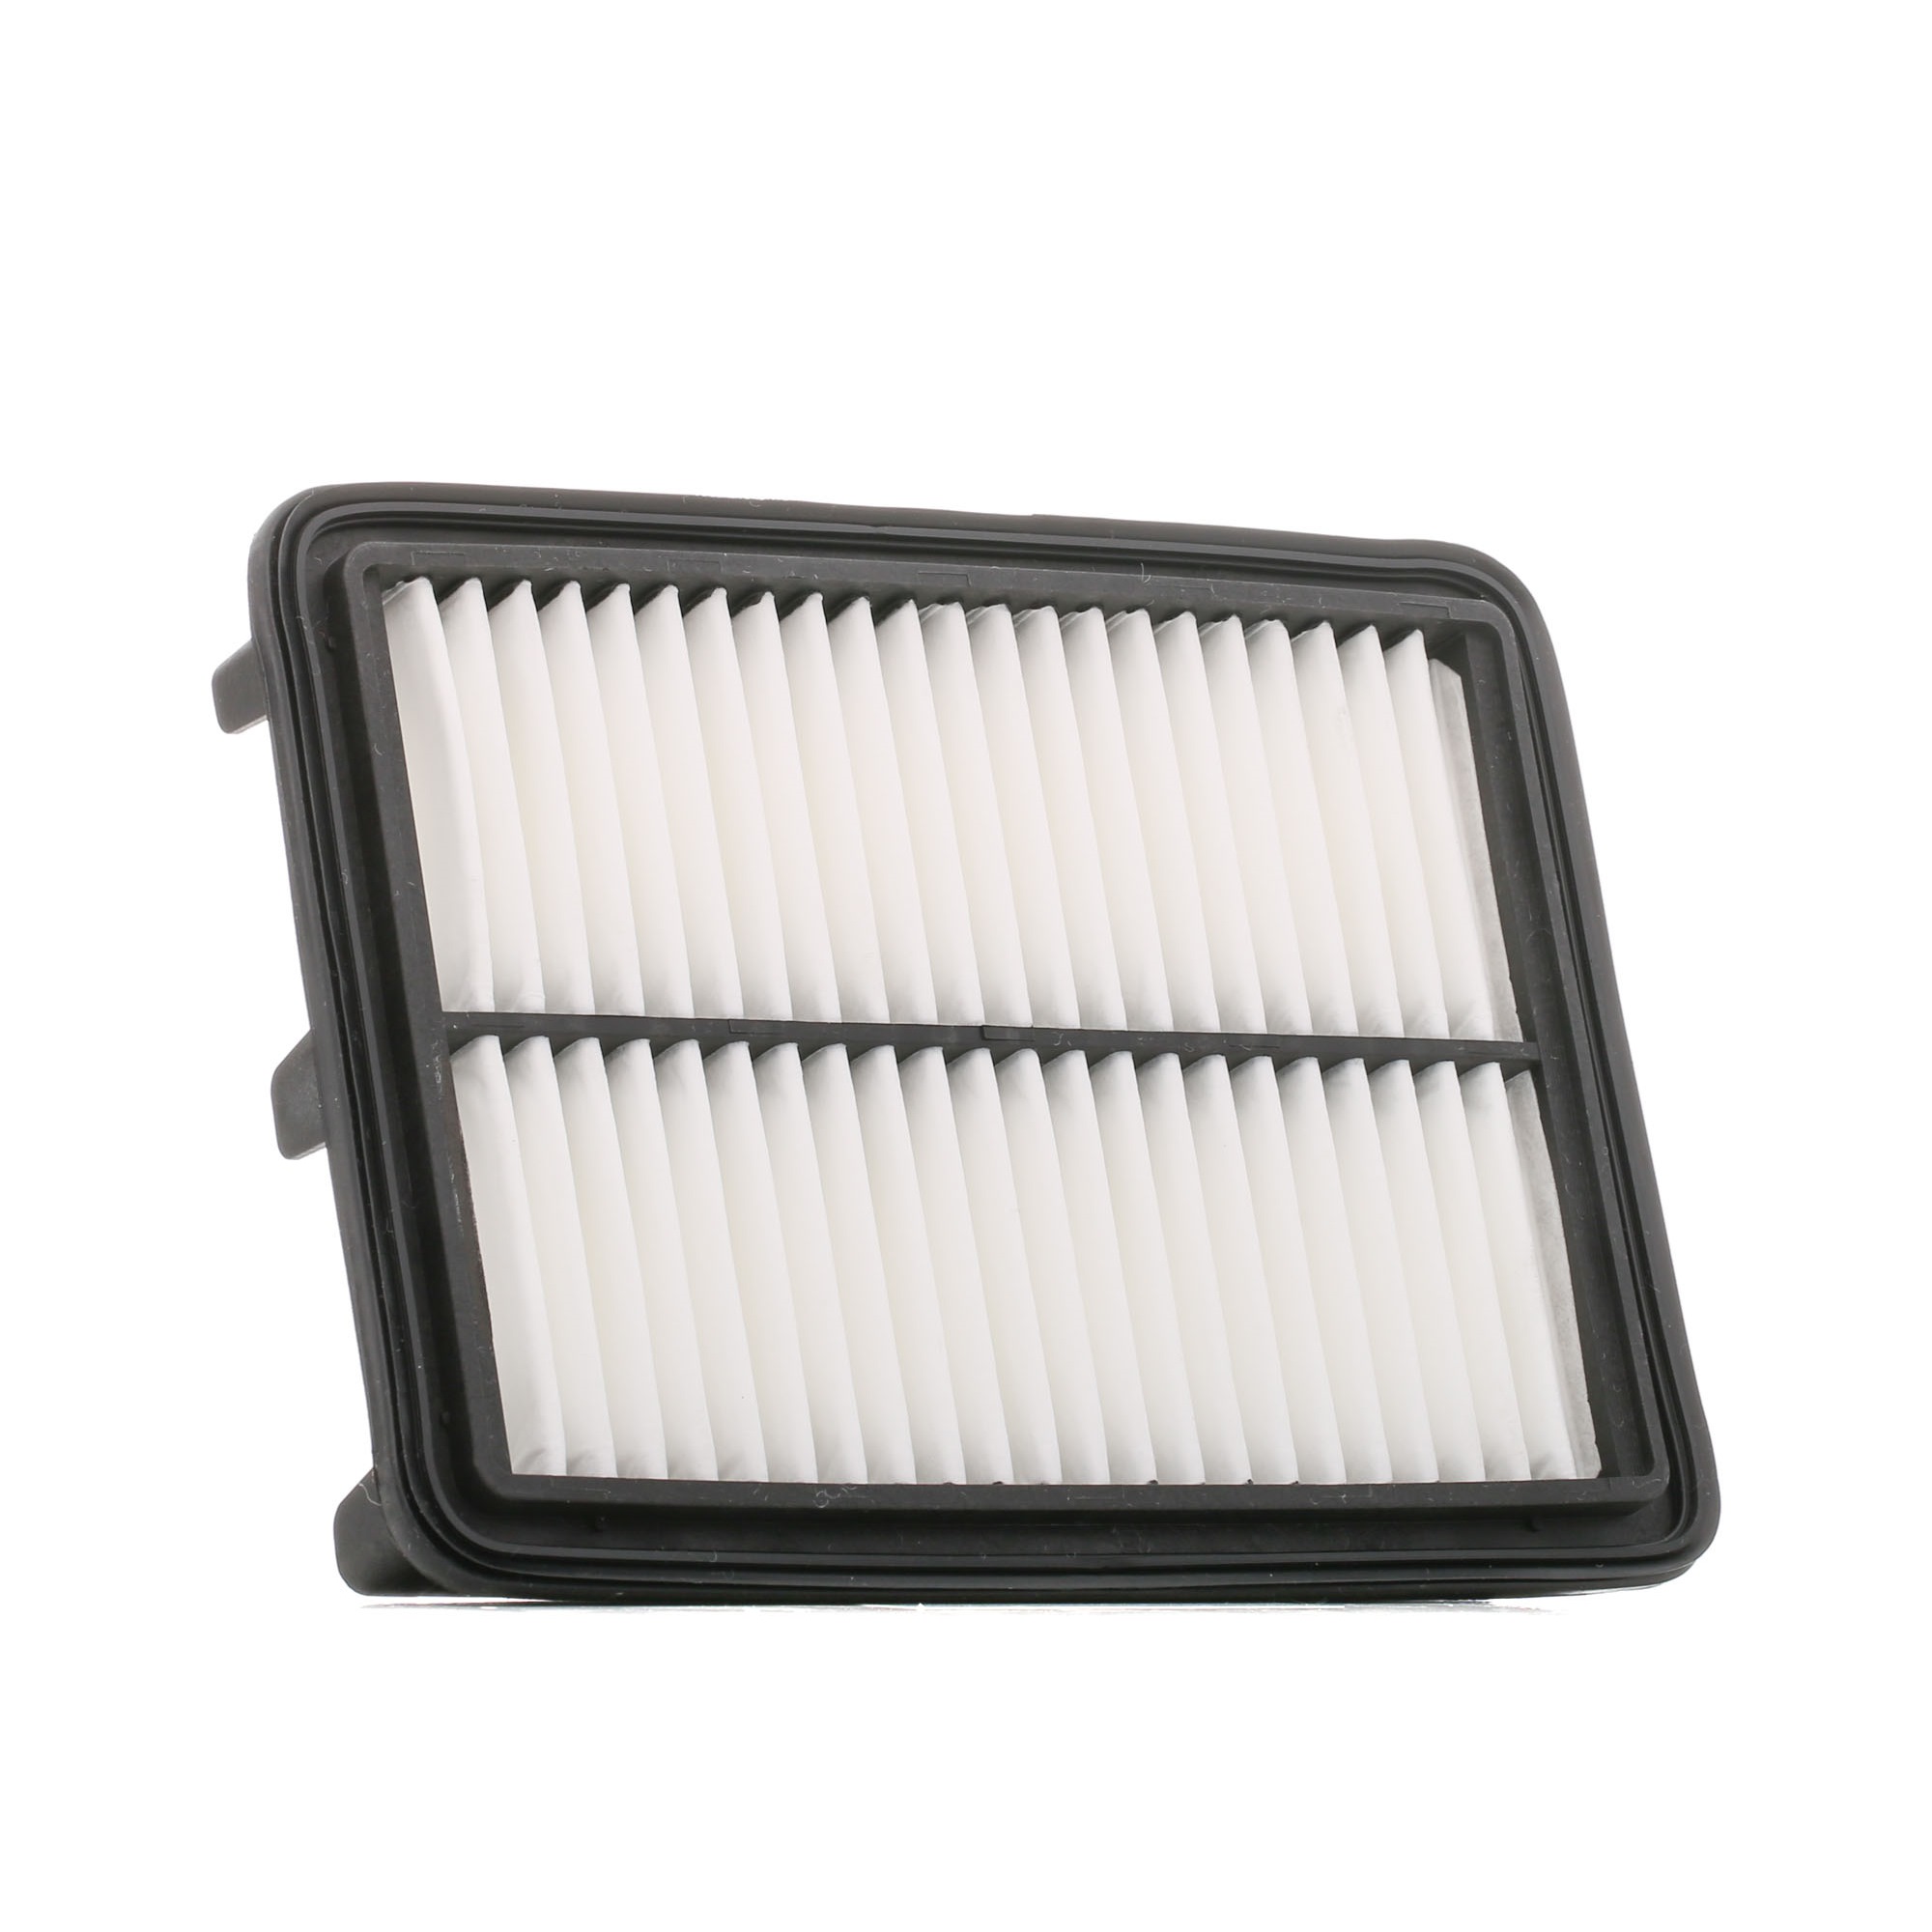 BOSCH F 026 400 457 Air filter MAZDA experience and price